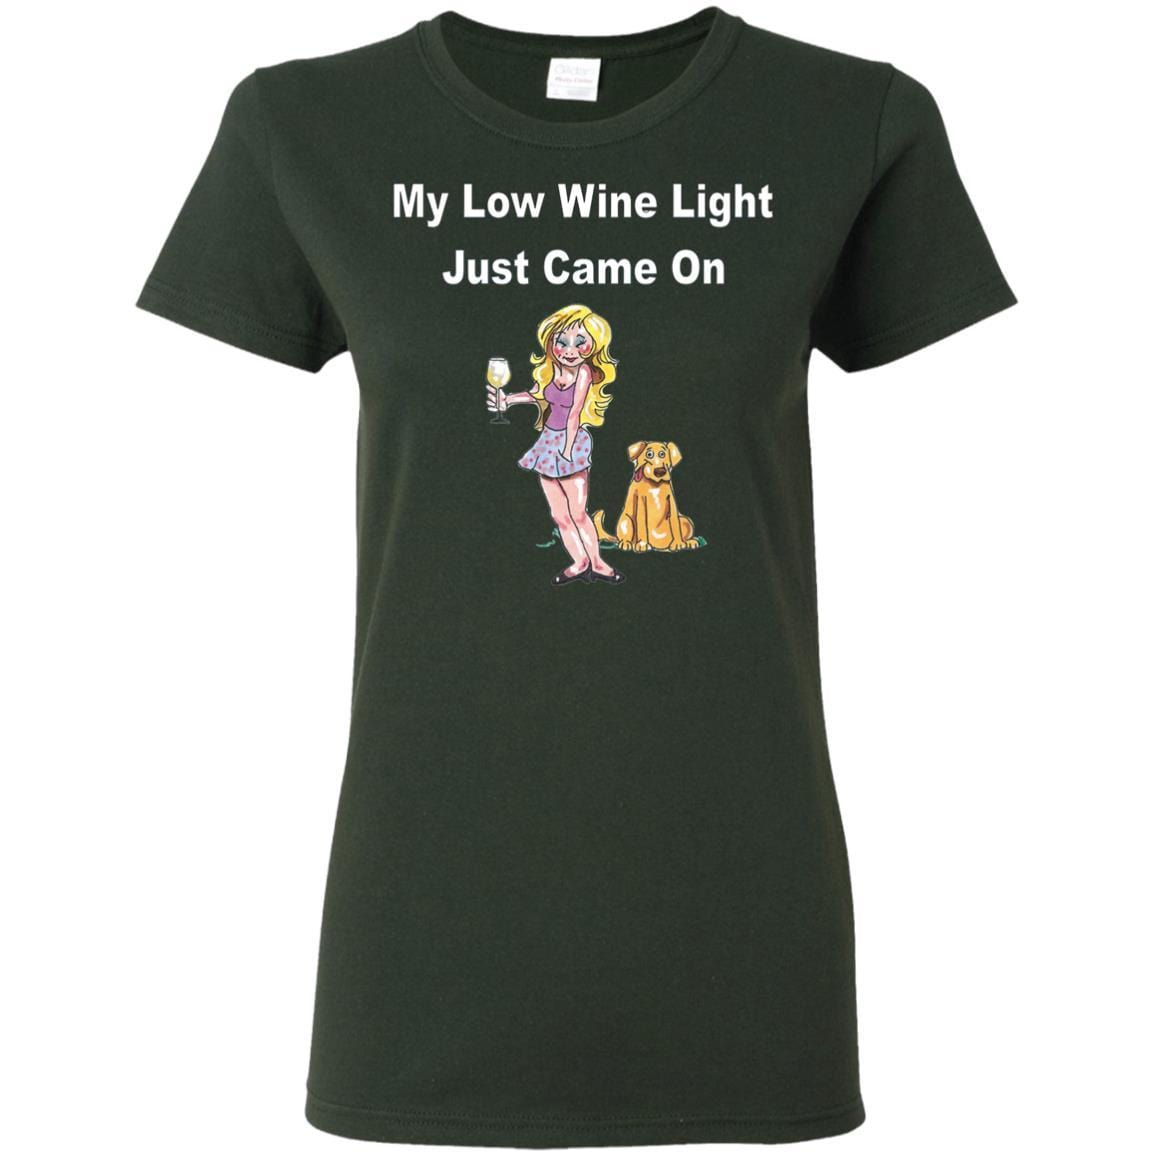 T-Shirts Forest Green / S WineyBitches.co 'Low Wine Light" Ladies' 5.3 oz. T-Shirt WineyBitchesCo